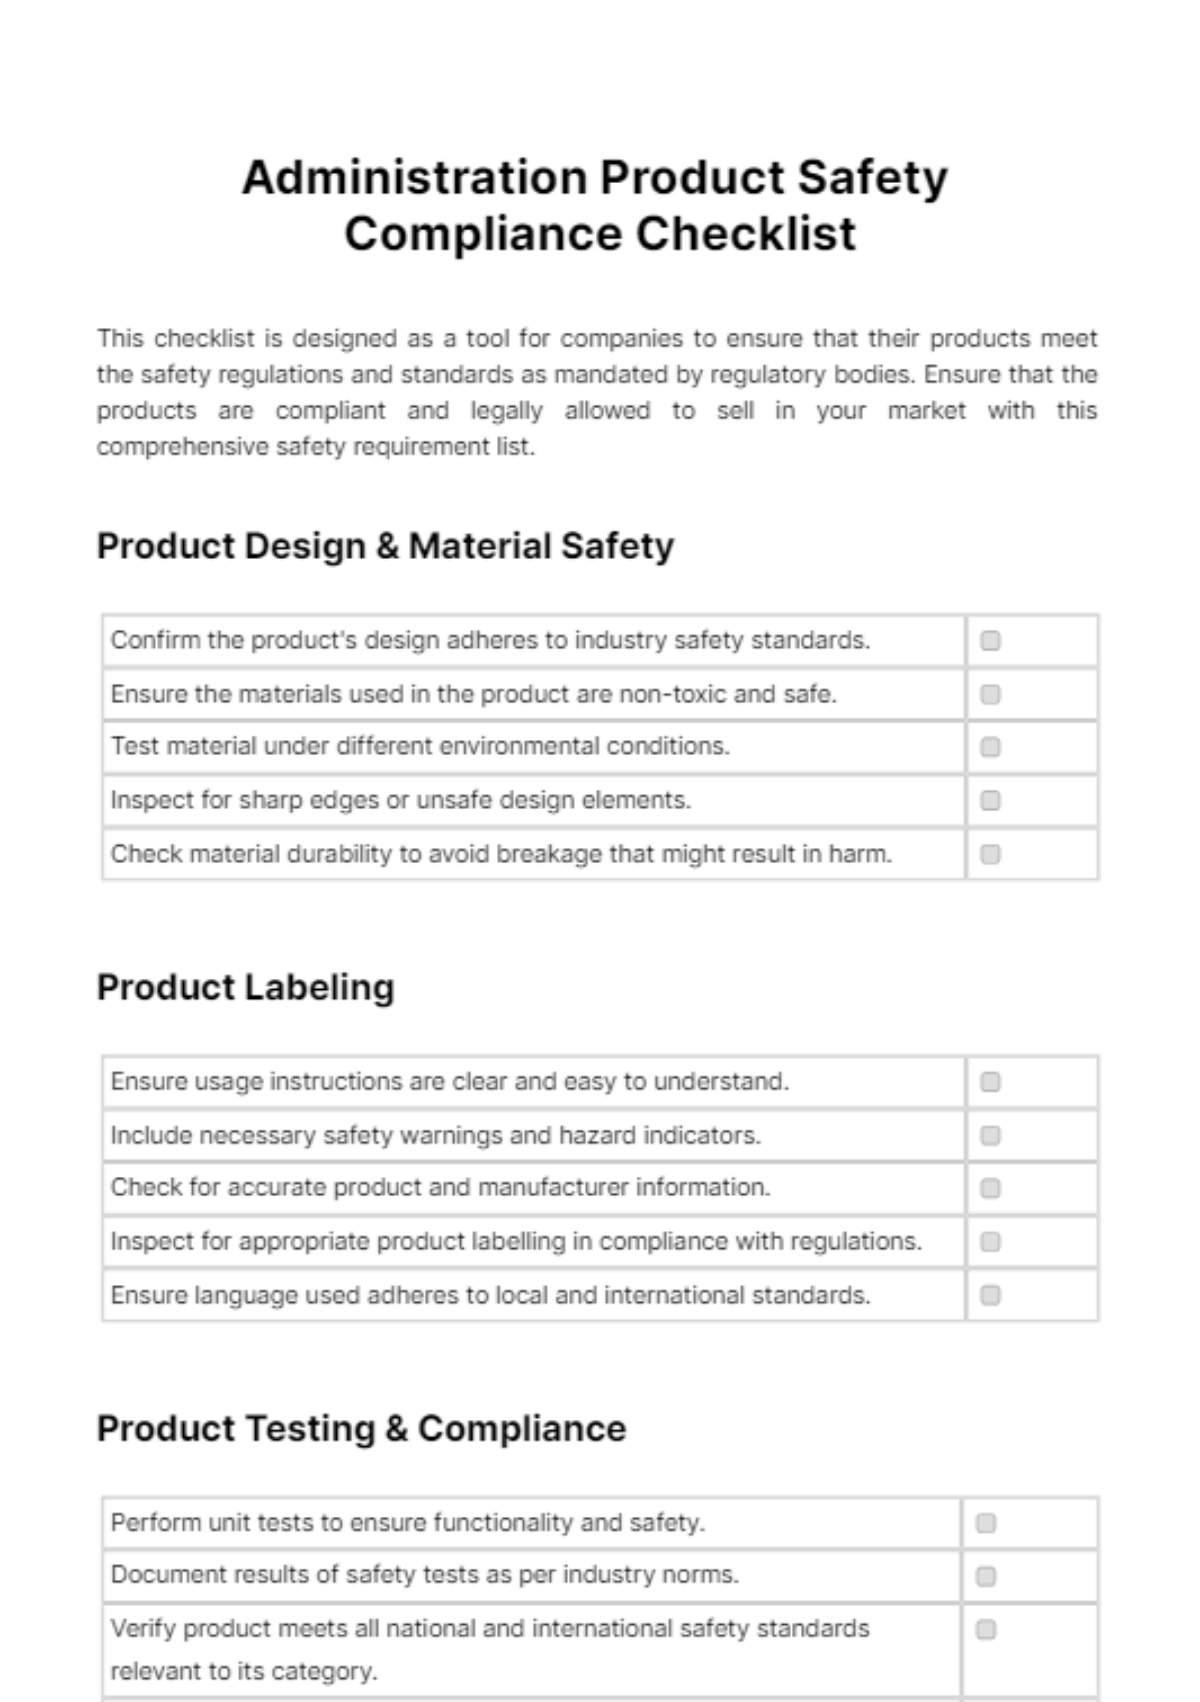 Administration Product Safety Compliance Checklist Template